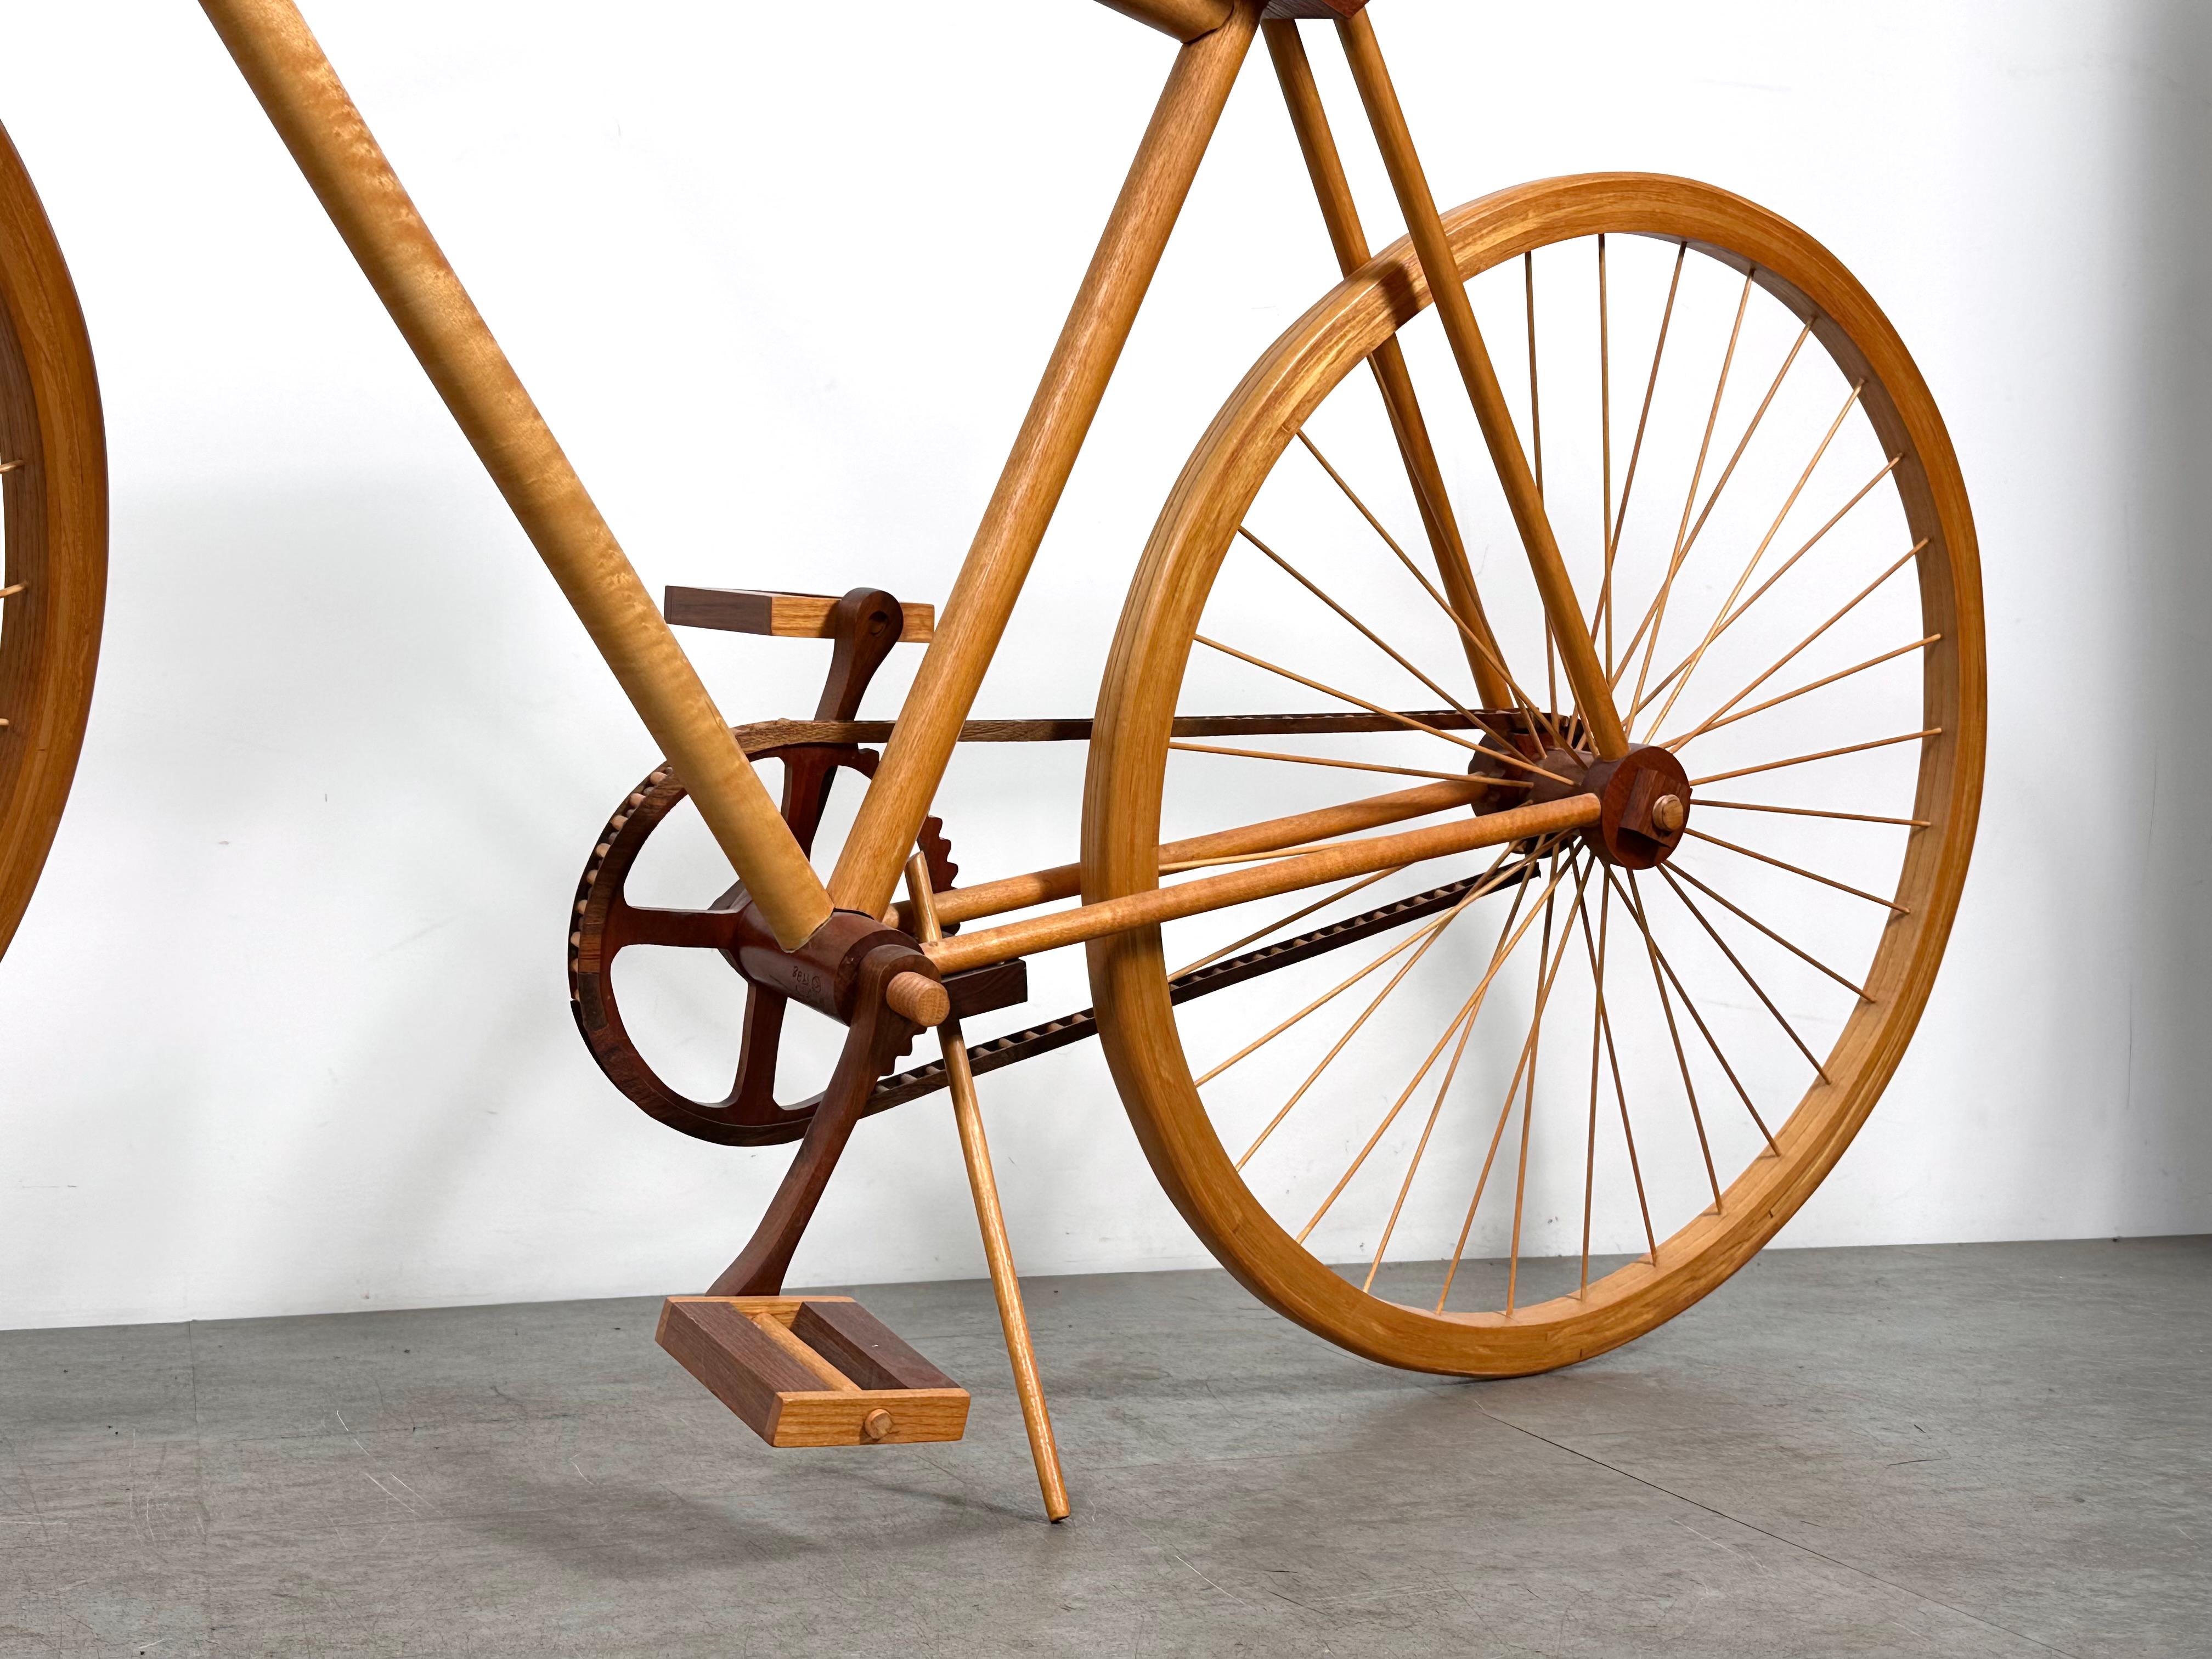 American Studio Craft Life Size Wooden Bicycle Sculpture Artist Signed 1988 In Good Condition For Sale In Troy, MI